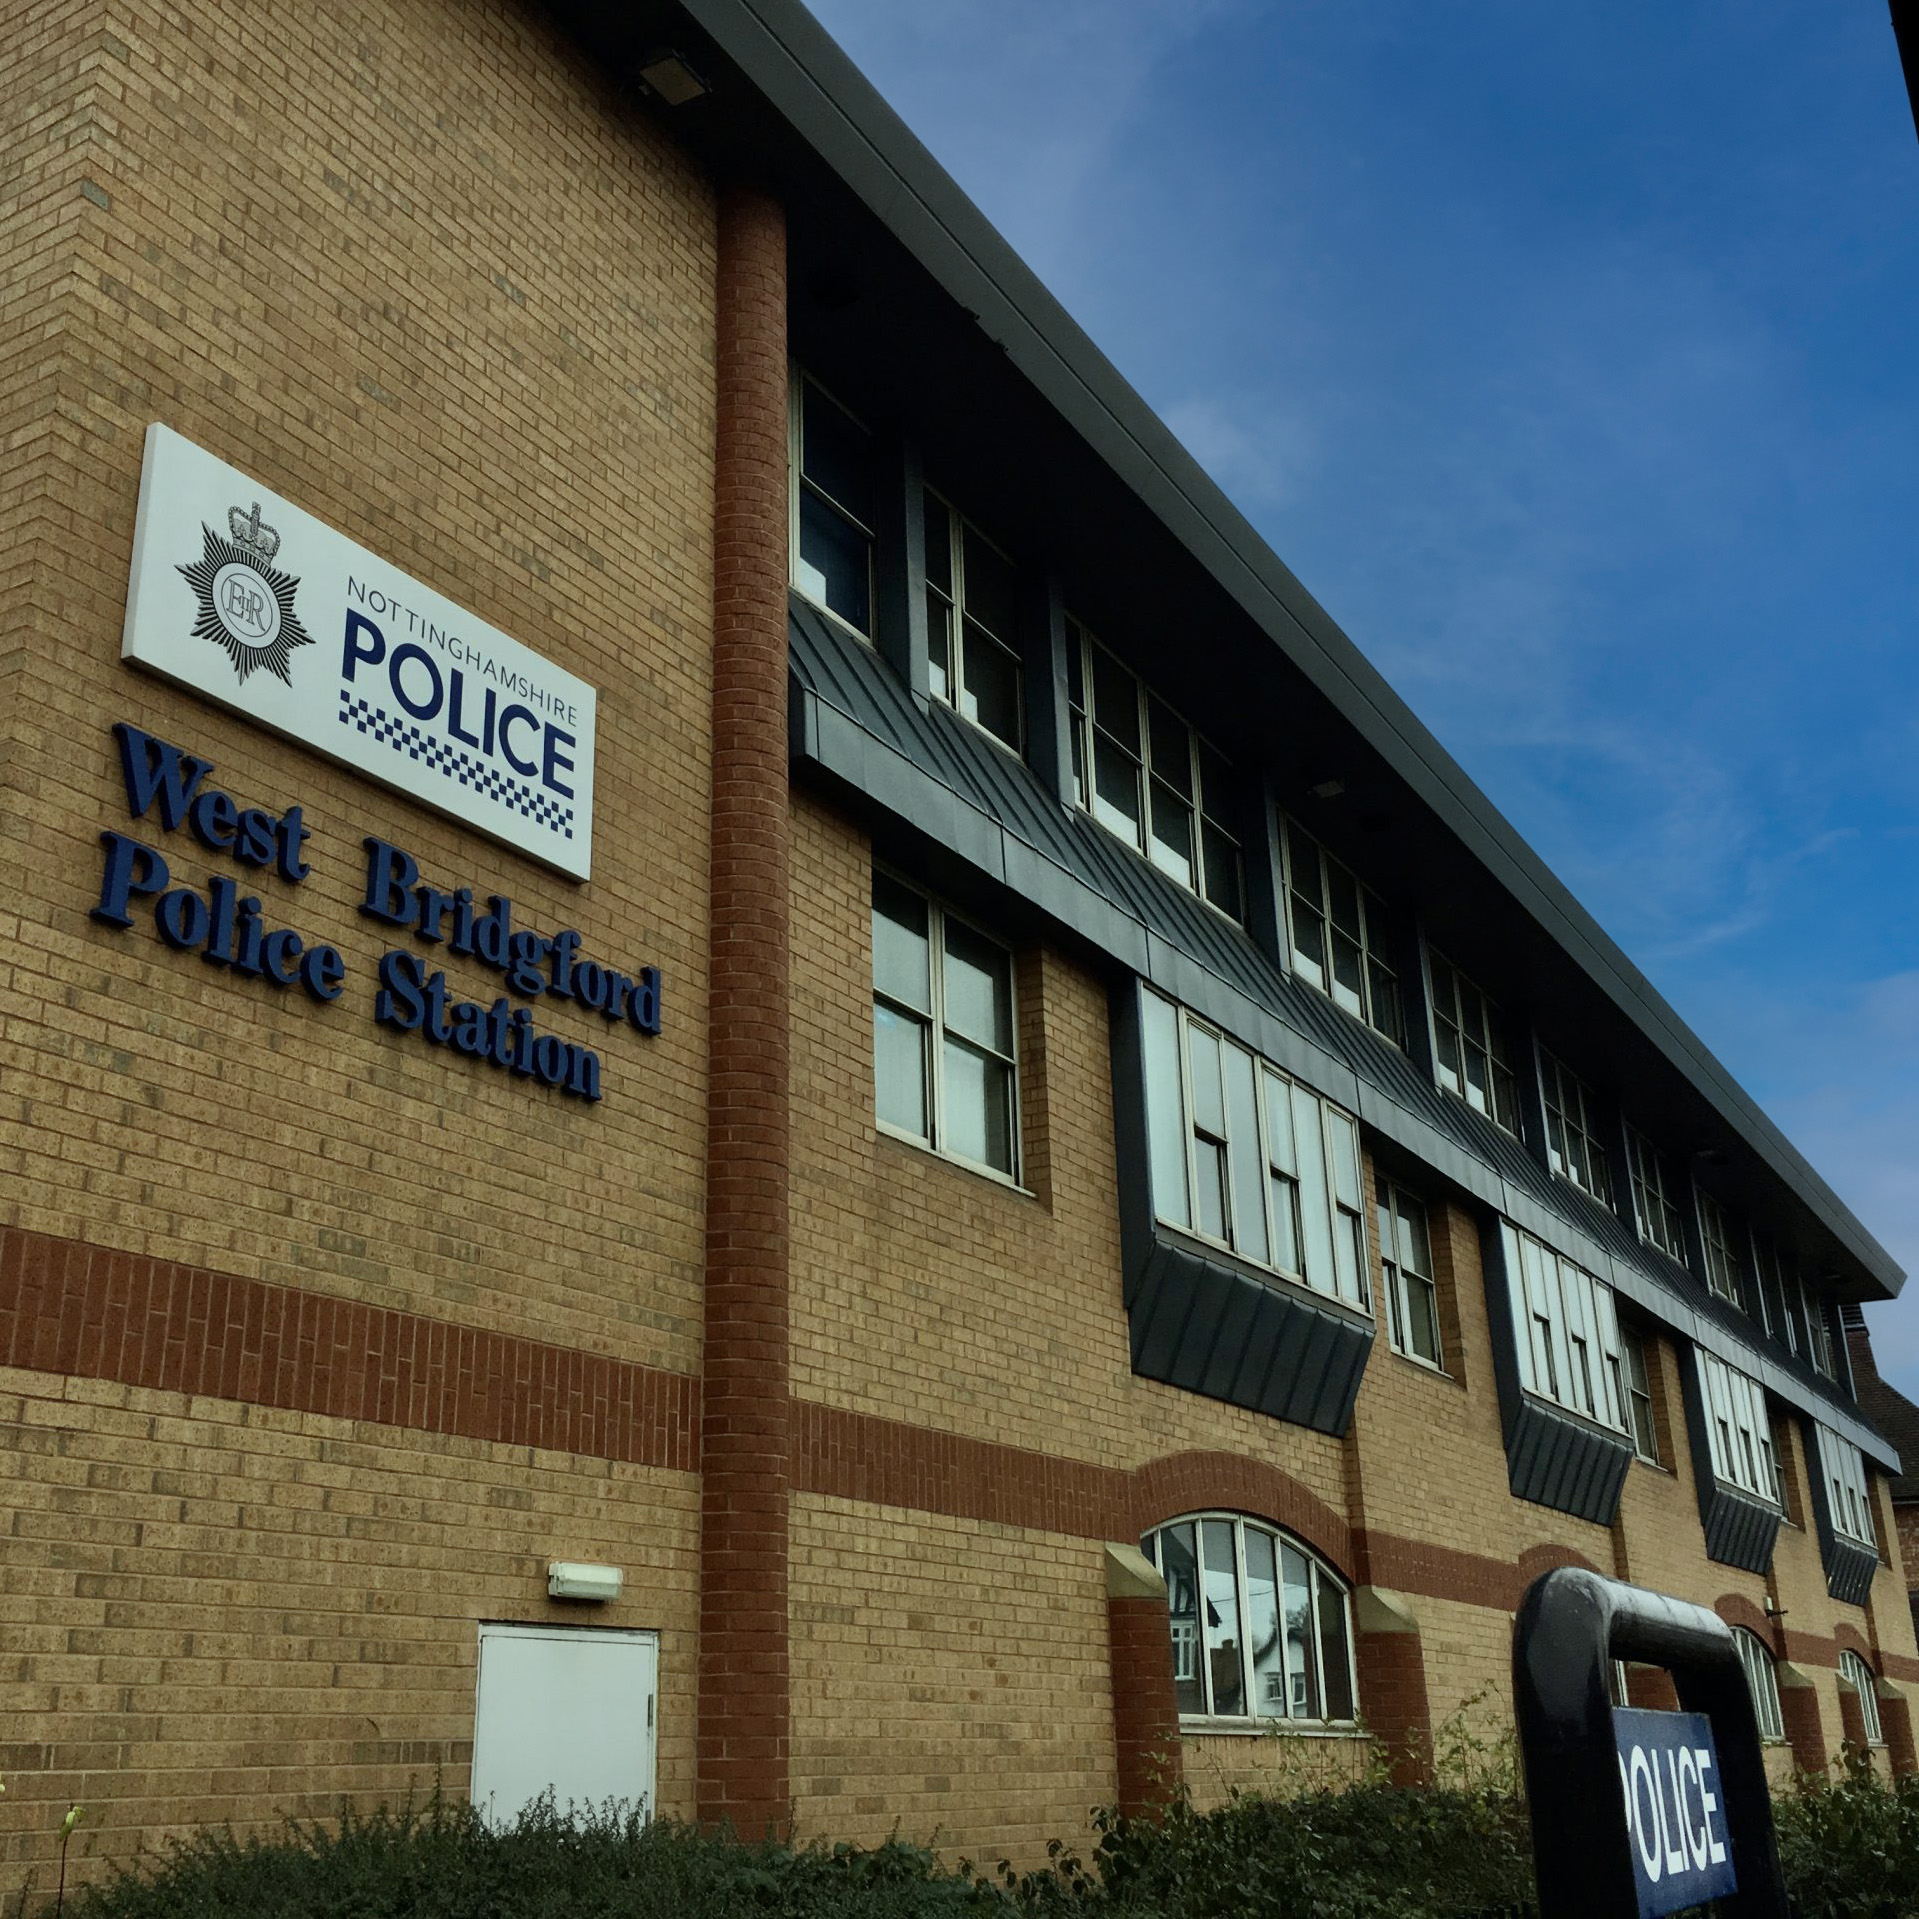 West Bridgford Police Station sold as retirement community operator completes acquisition